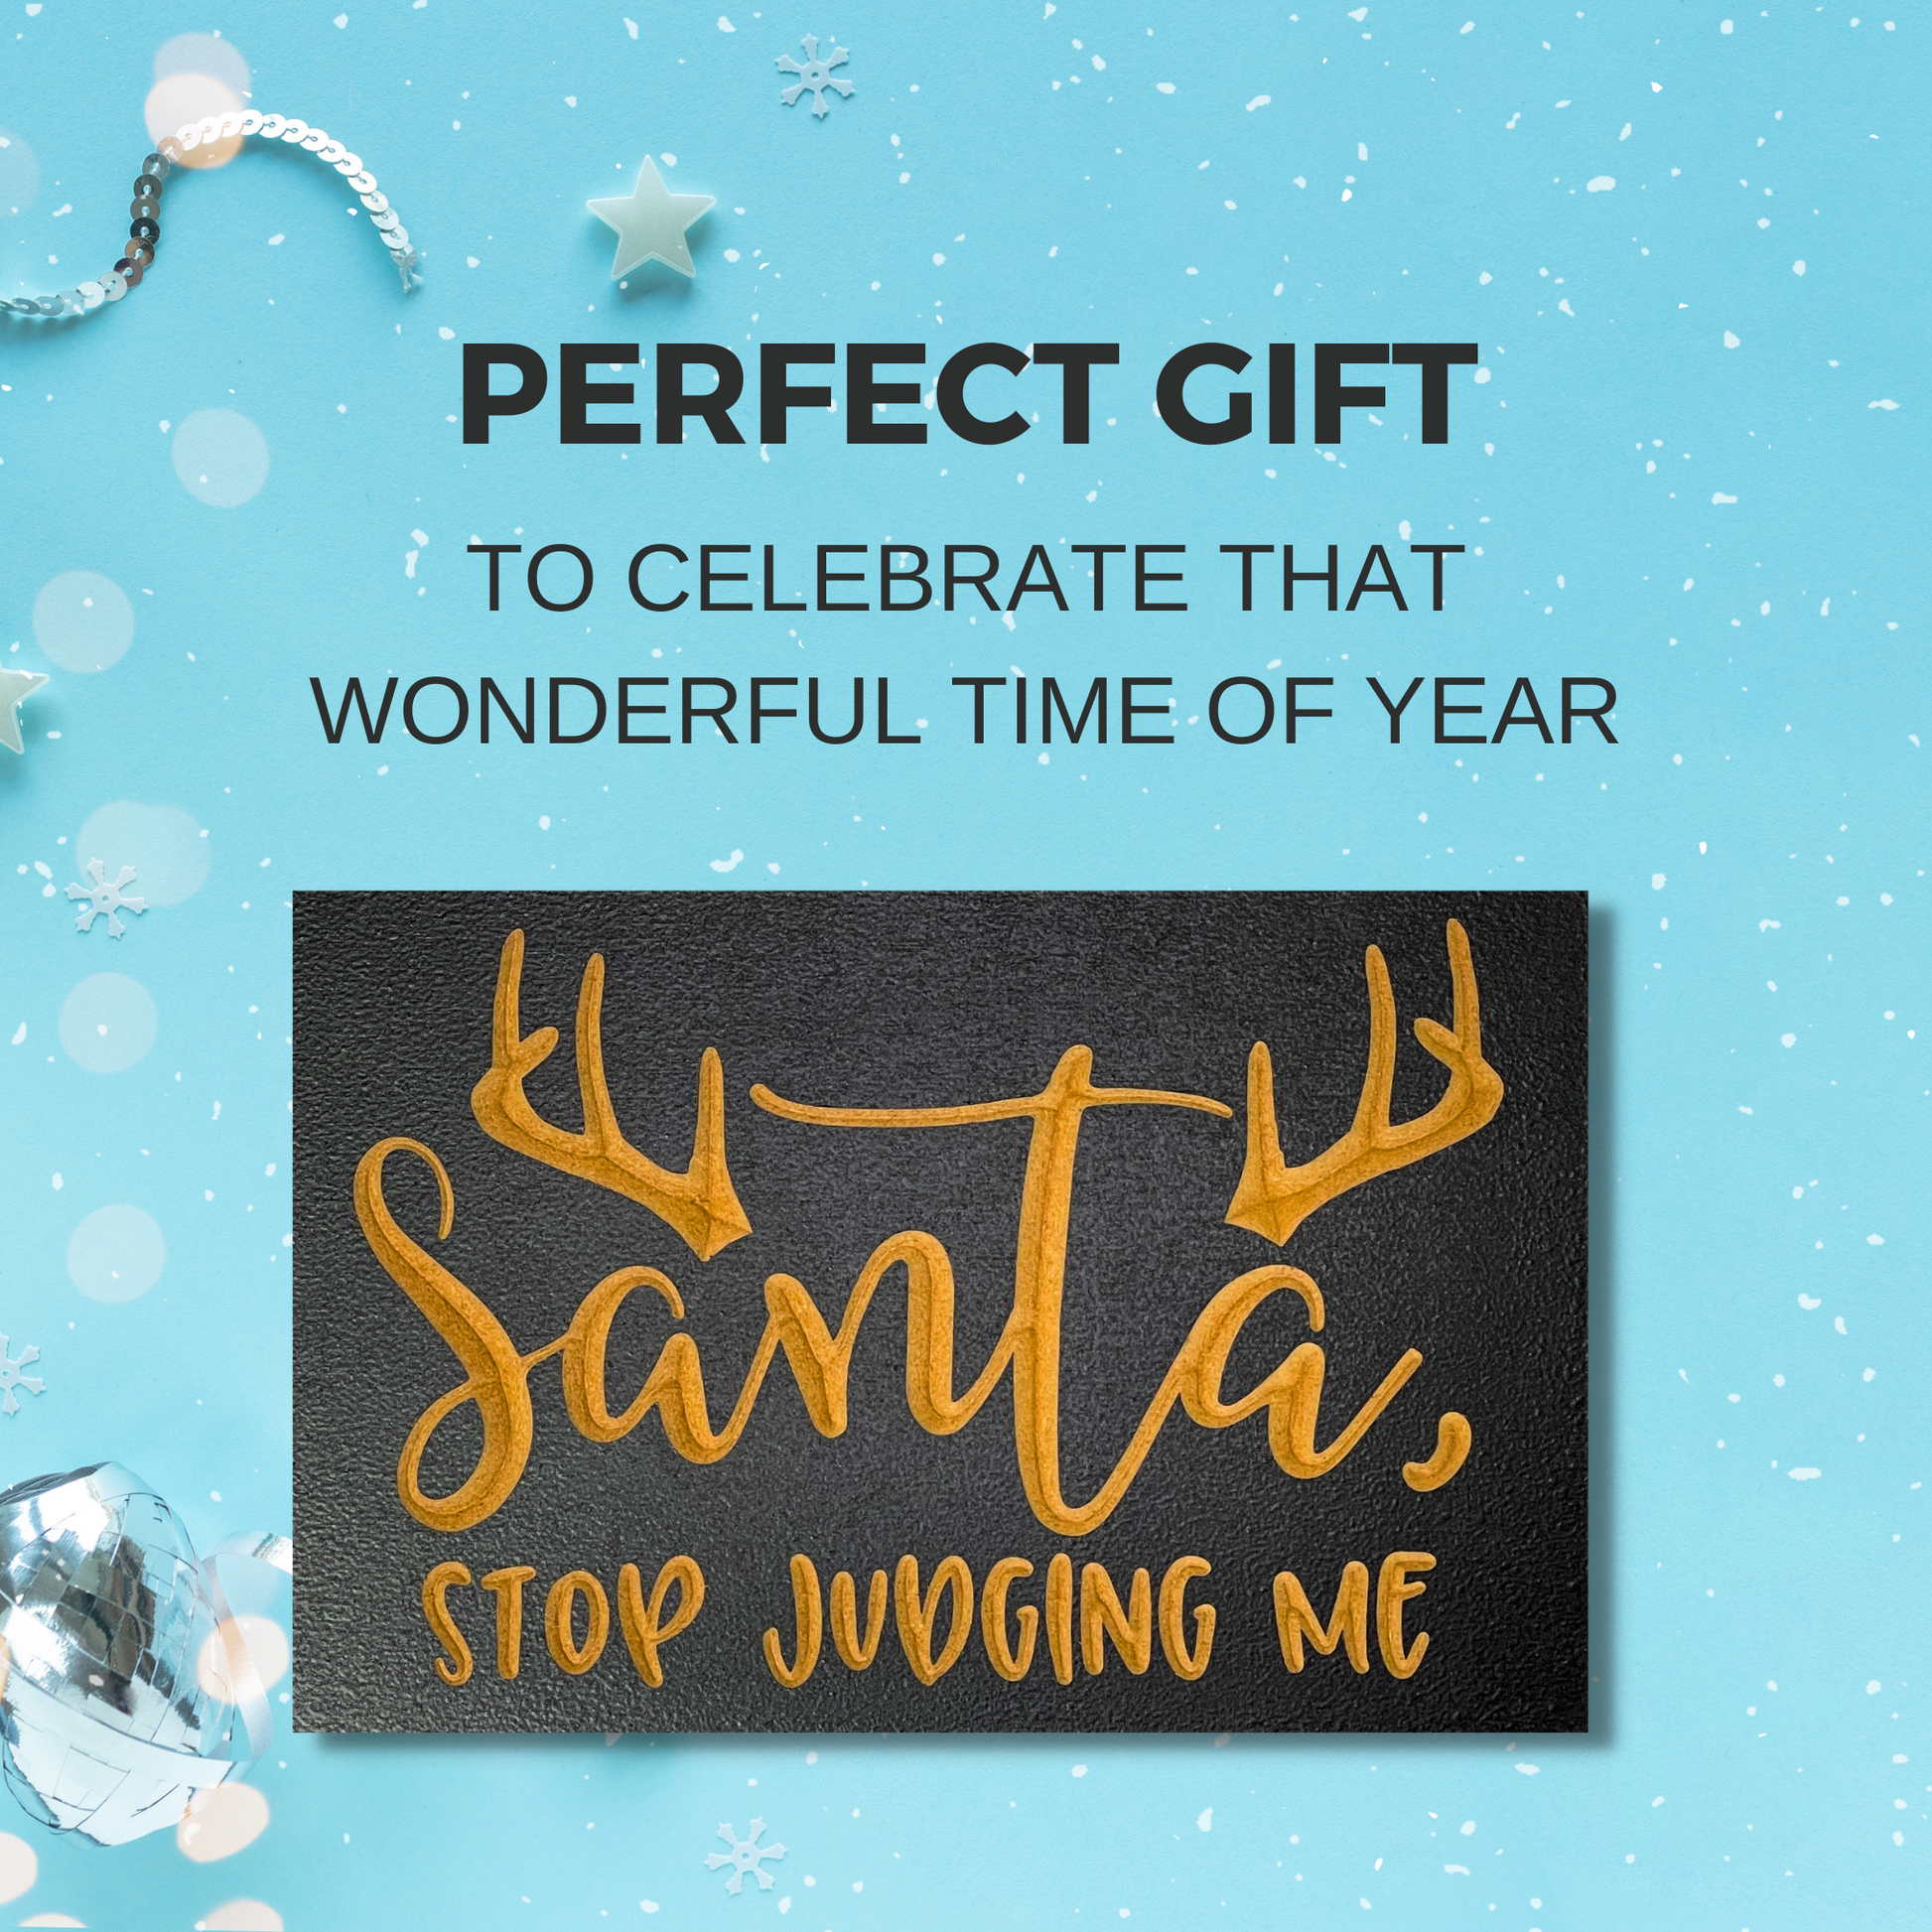 Santa, Stop Judging Me Carved Wooden Sign Perfect Gift